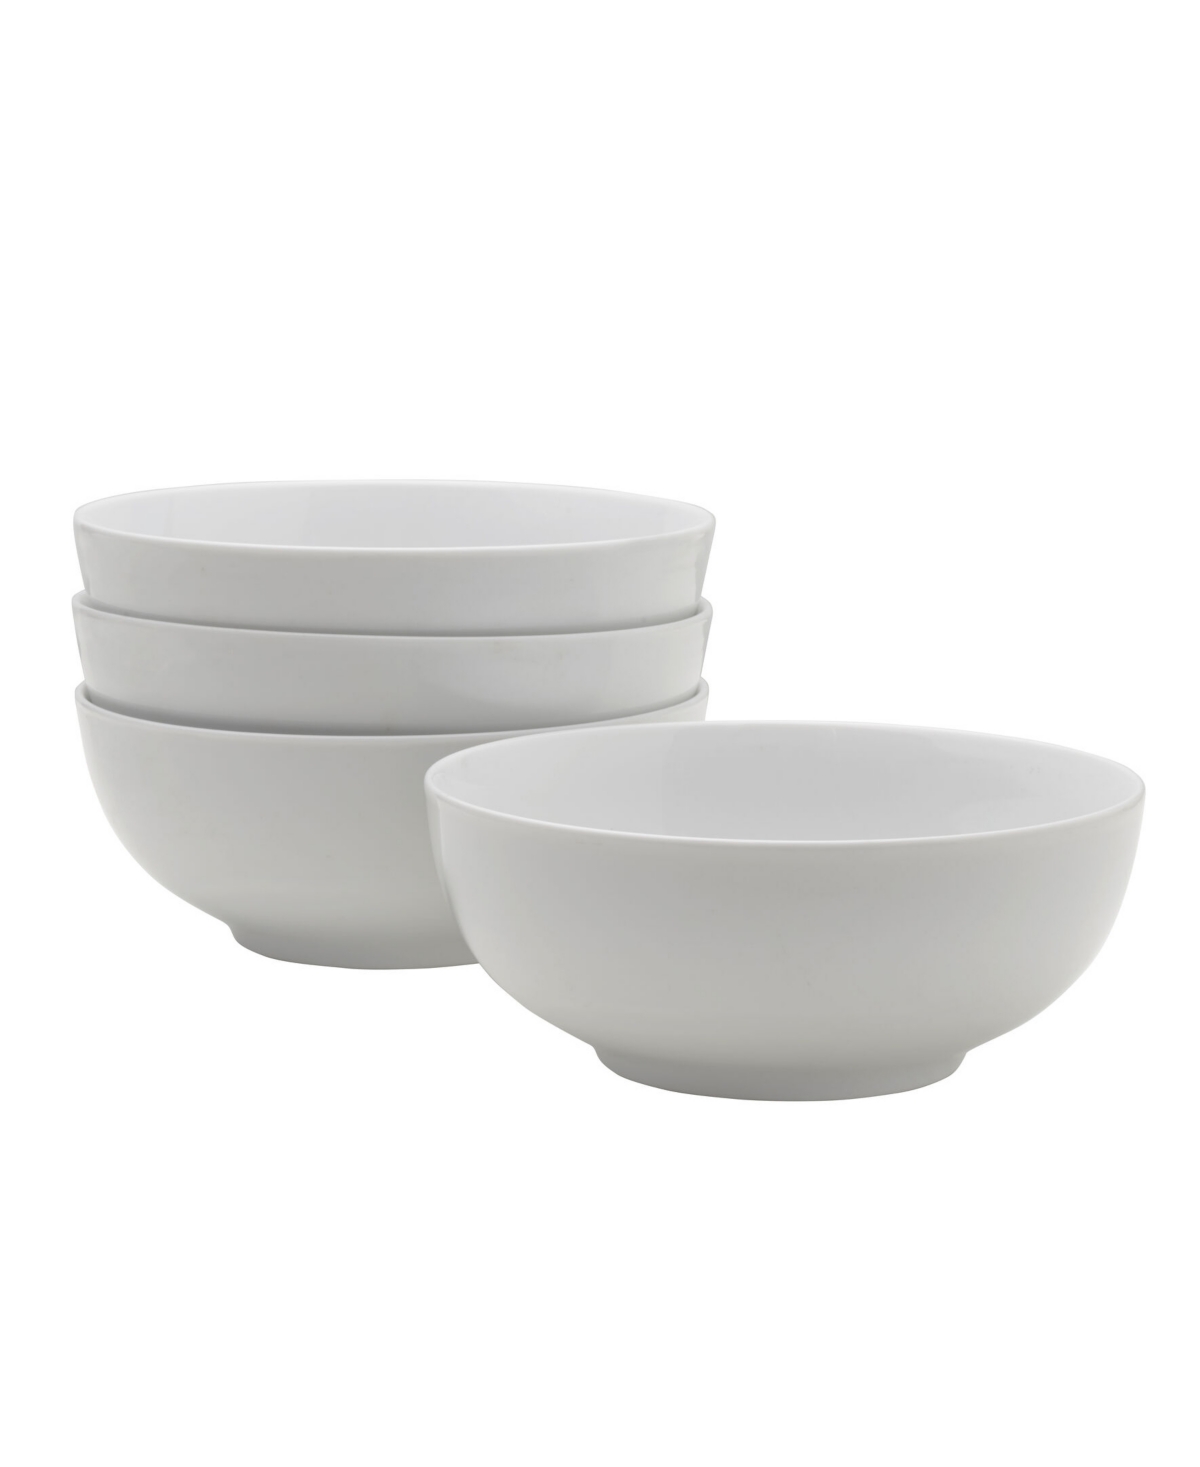 Everyday Whiteware Cereal Bowl 4 Piece Set - White